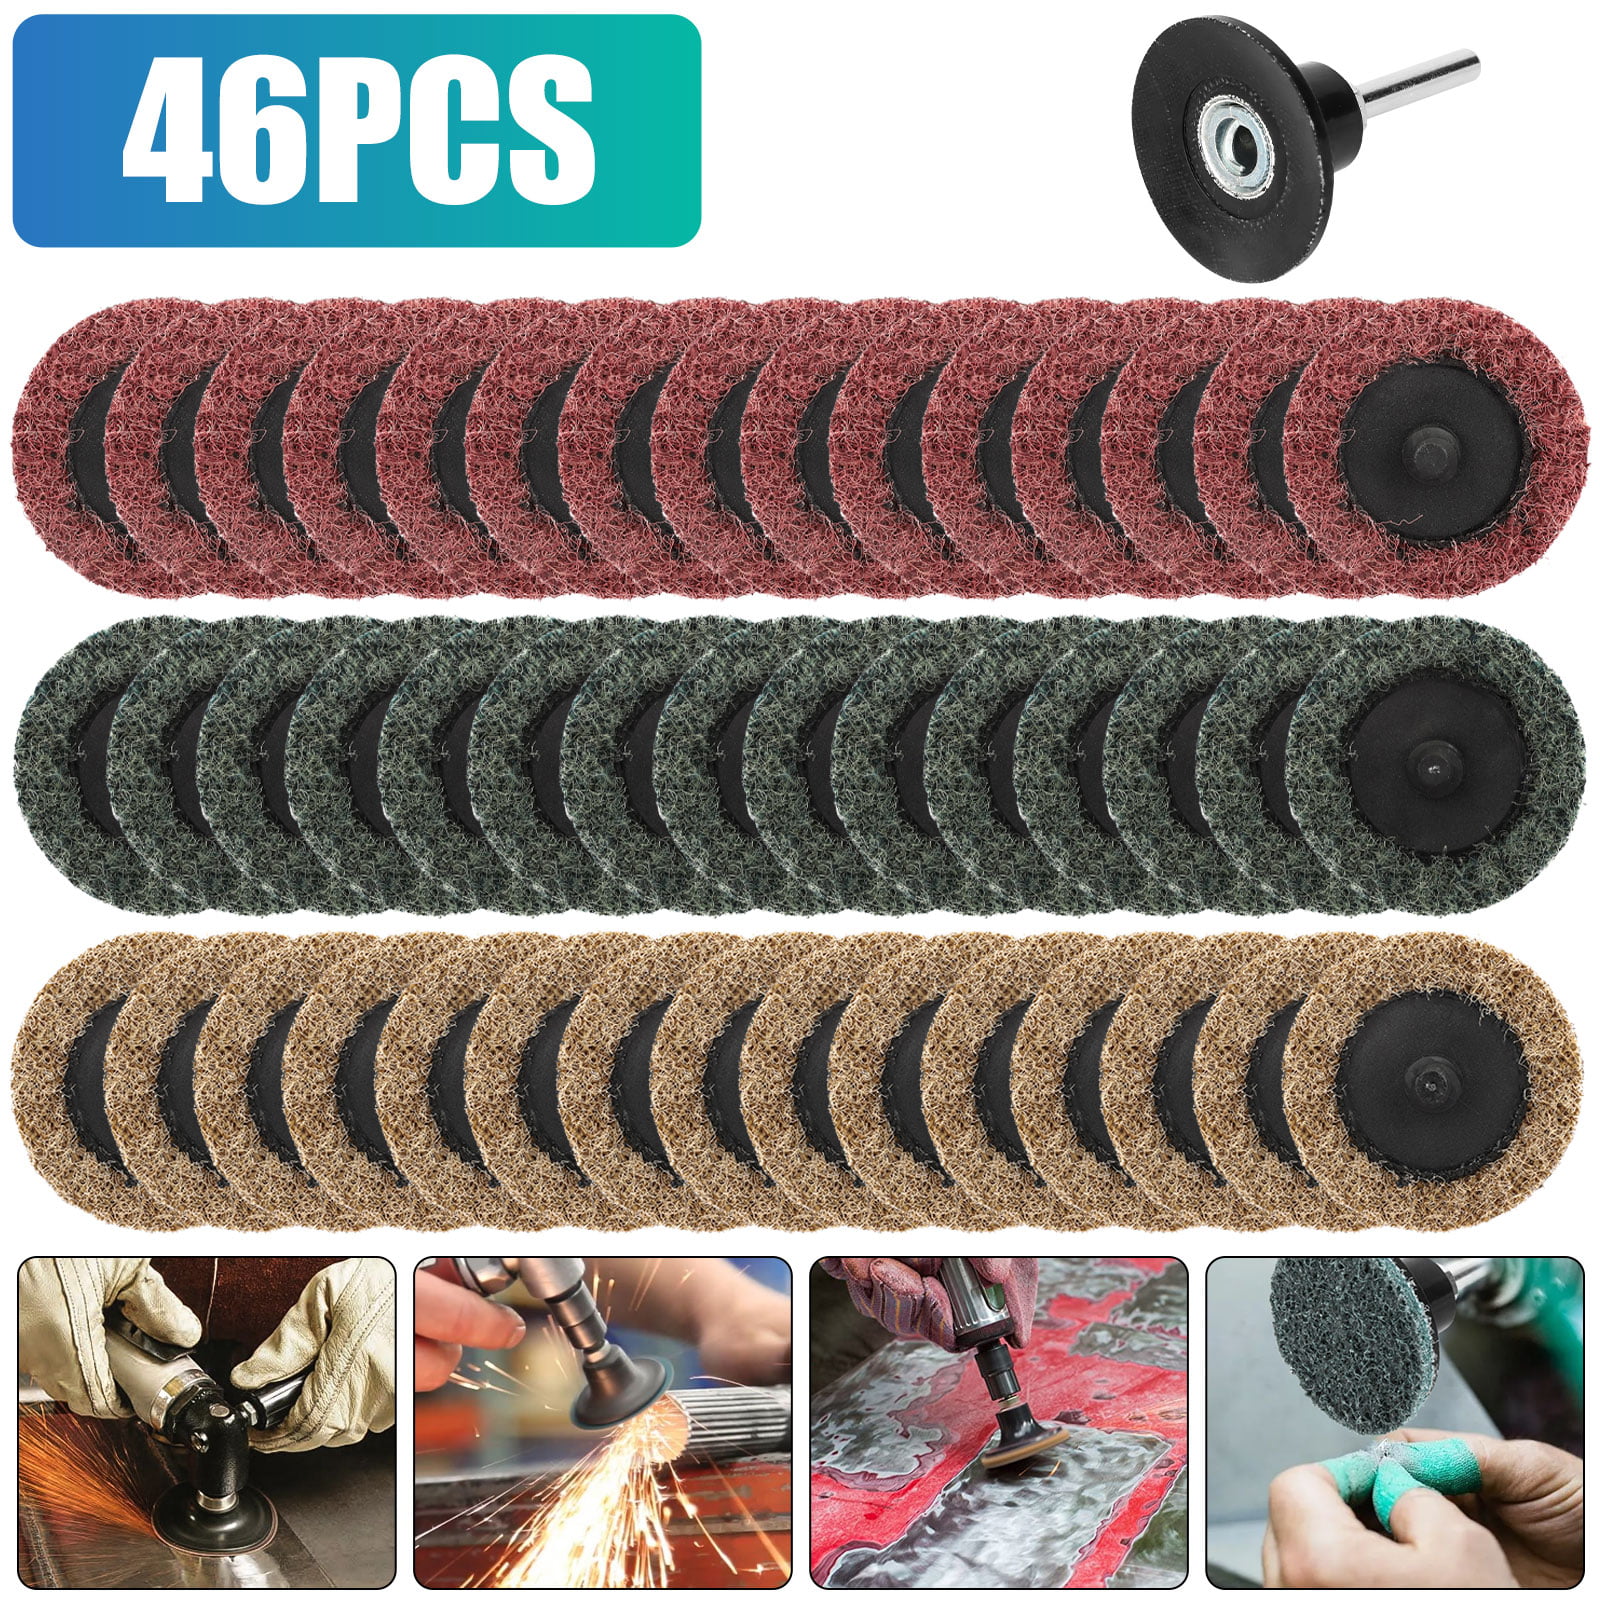 Surface Conditioning Roll Discs Sanding Discs with 1/4 Holder Mornajina 48Pcs 2 inch Quick Change Discs Set Fine Medium Coarse for Die Grinder Surface Prep Polish Finish Burr Rust Paint Removal 